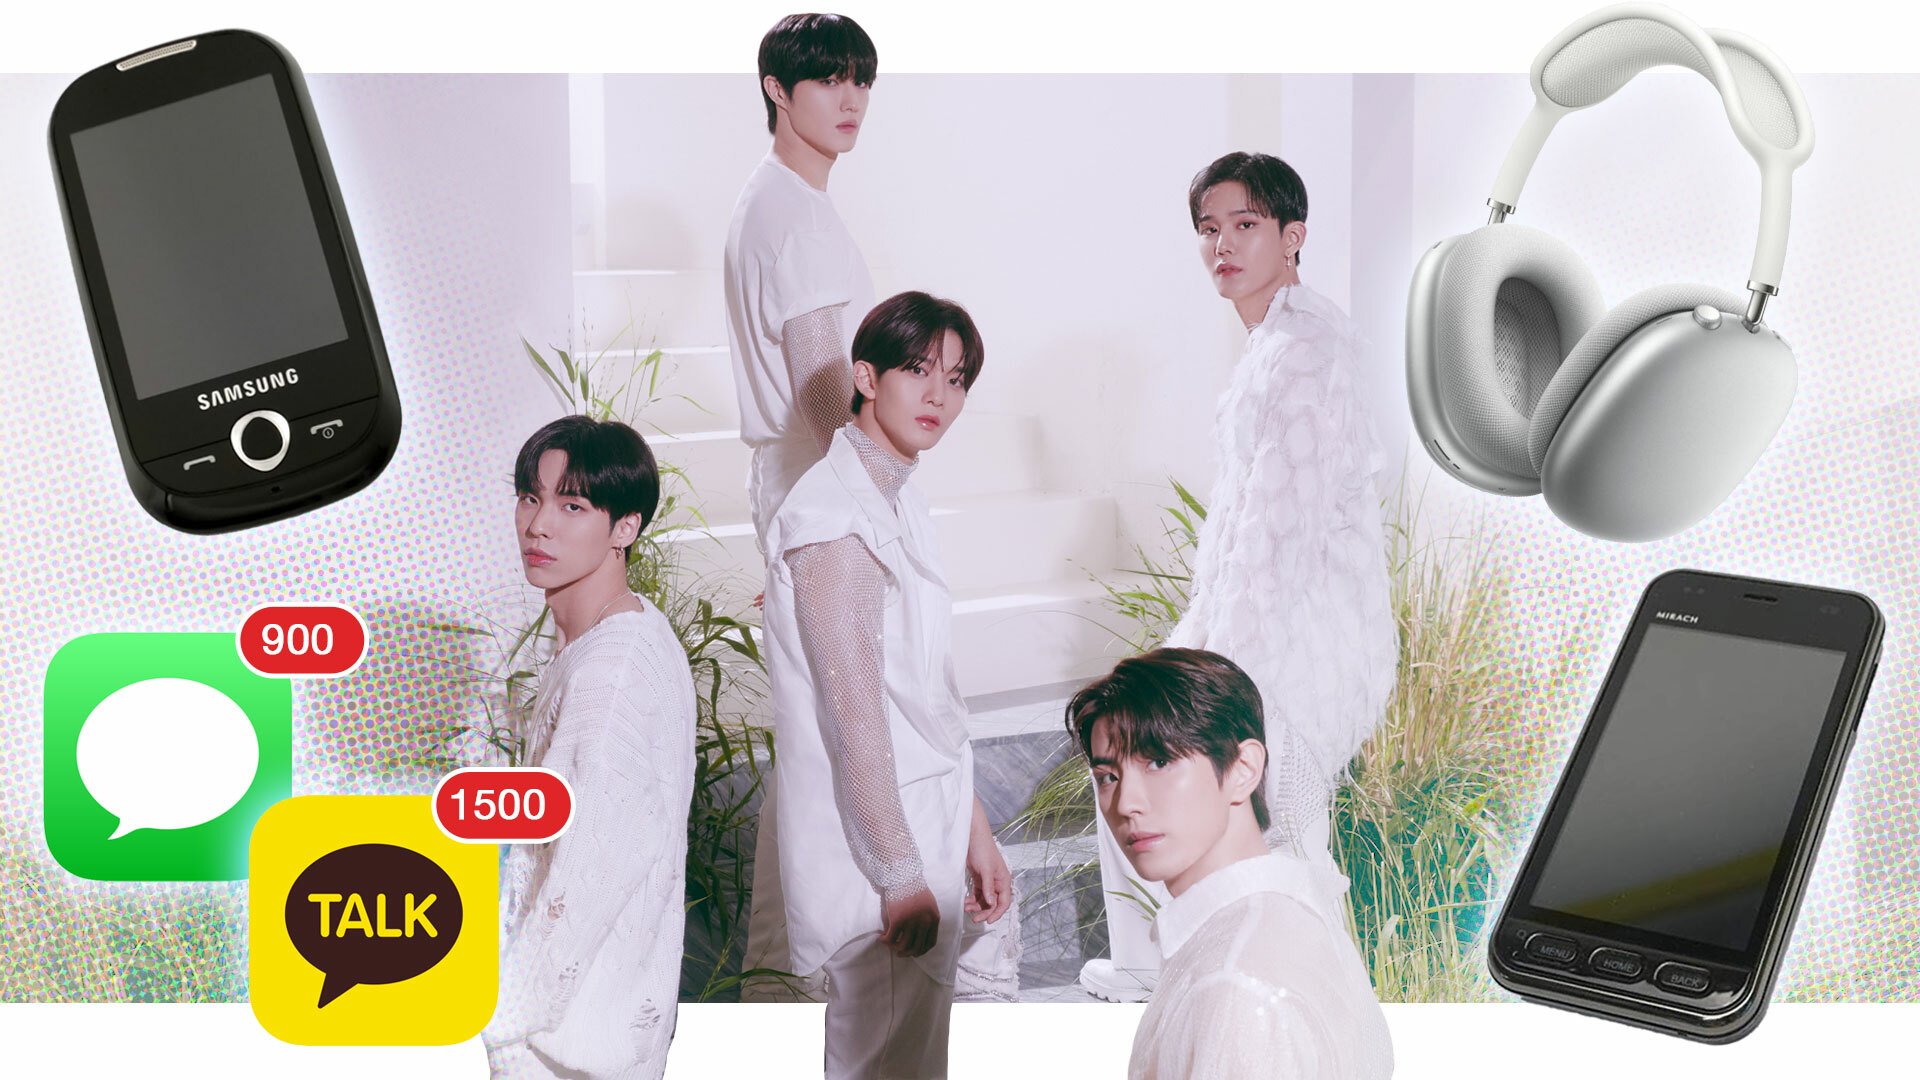 CIX in white, surrounded by the KakaoTalk app with 1500 unread messages, the iMessage app with 900 unread messages, Apple Max headphones, a Mirach phone, and a Korby phone.